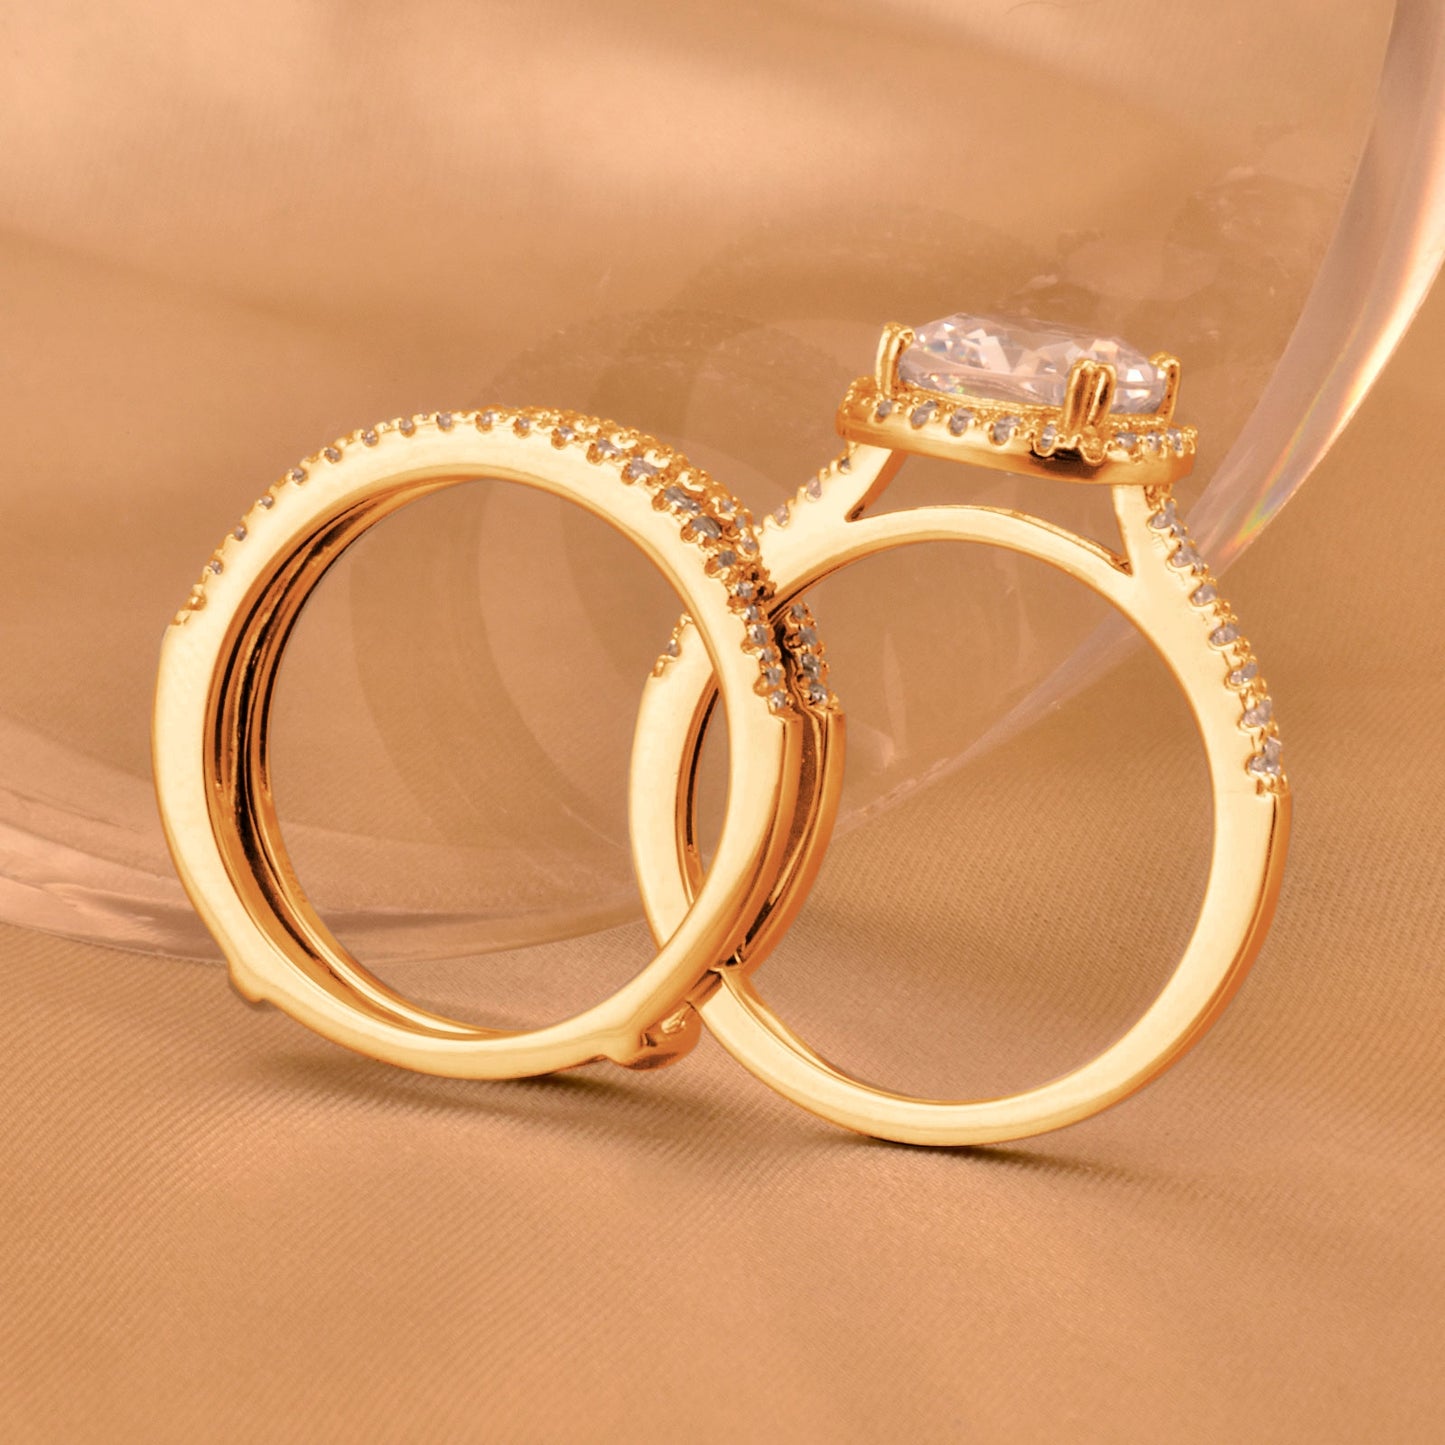 Gold Engagement Ring